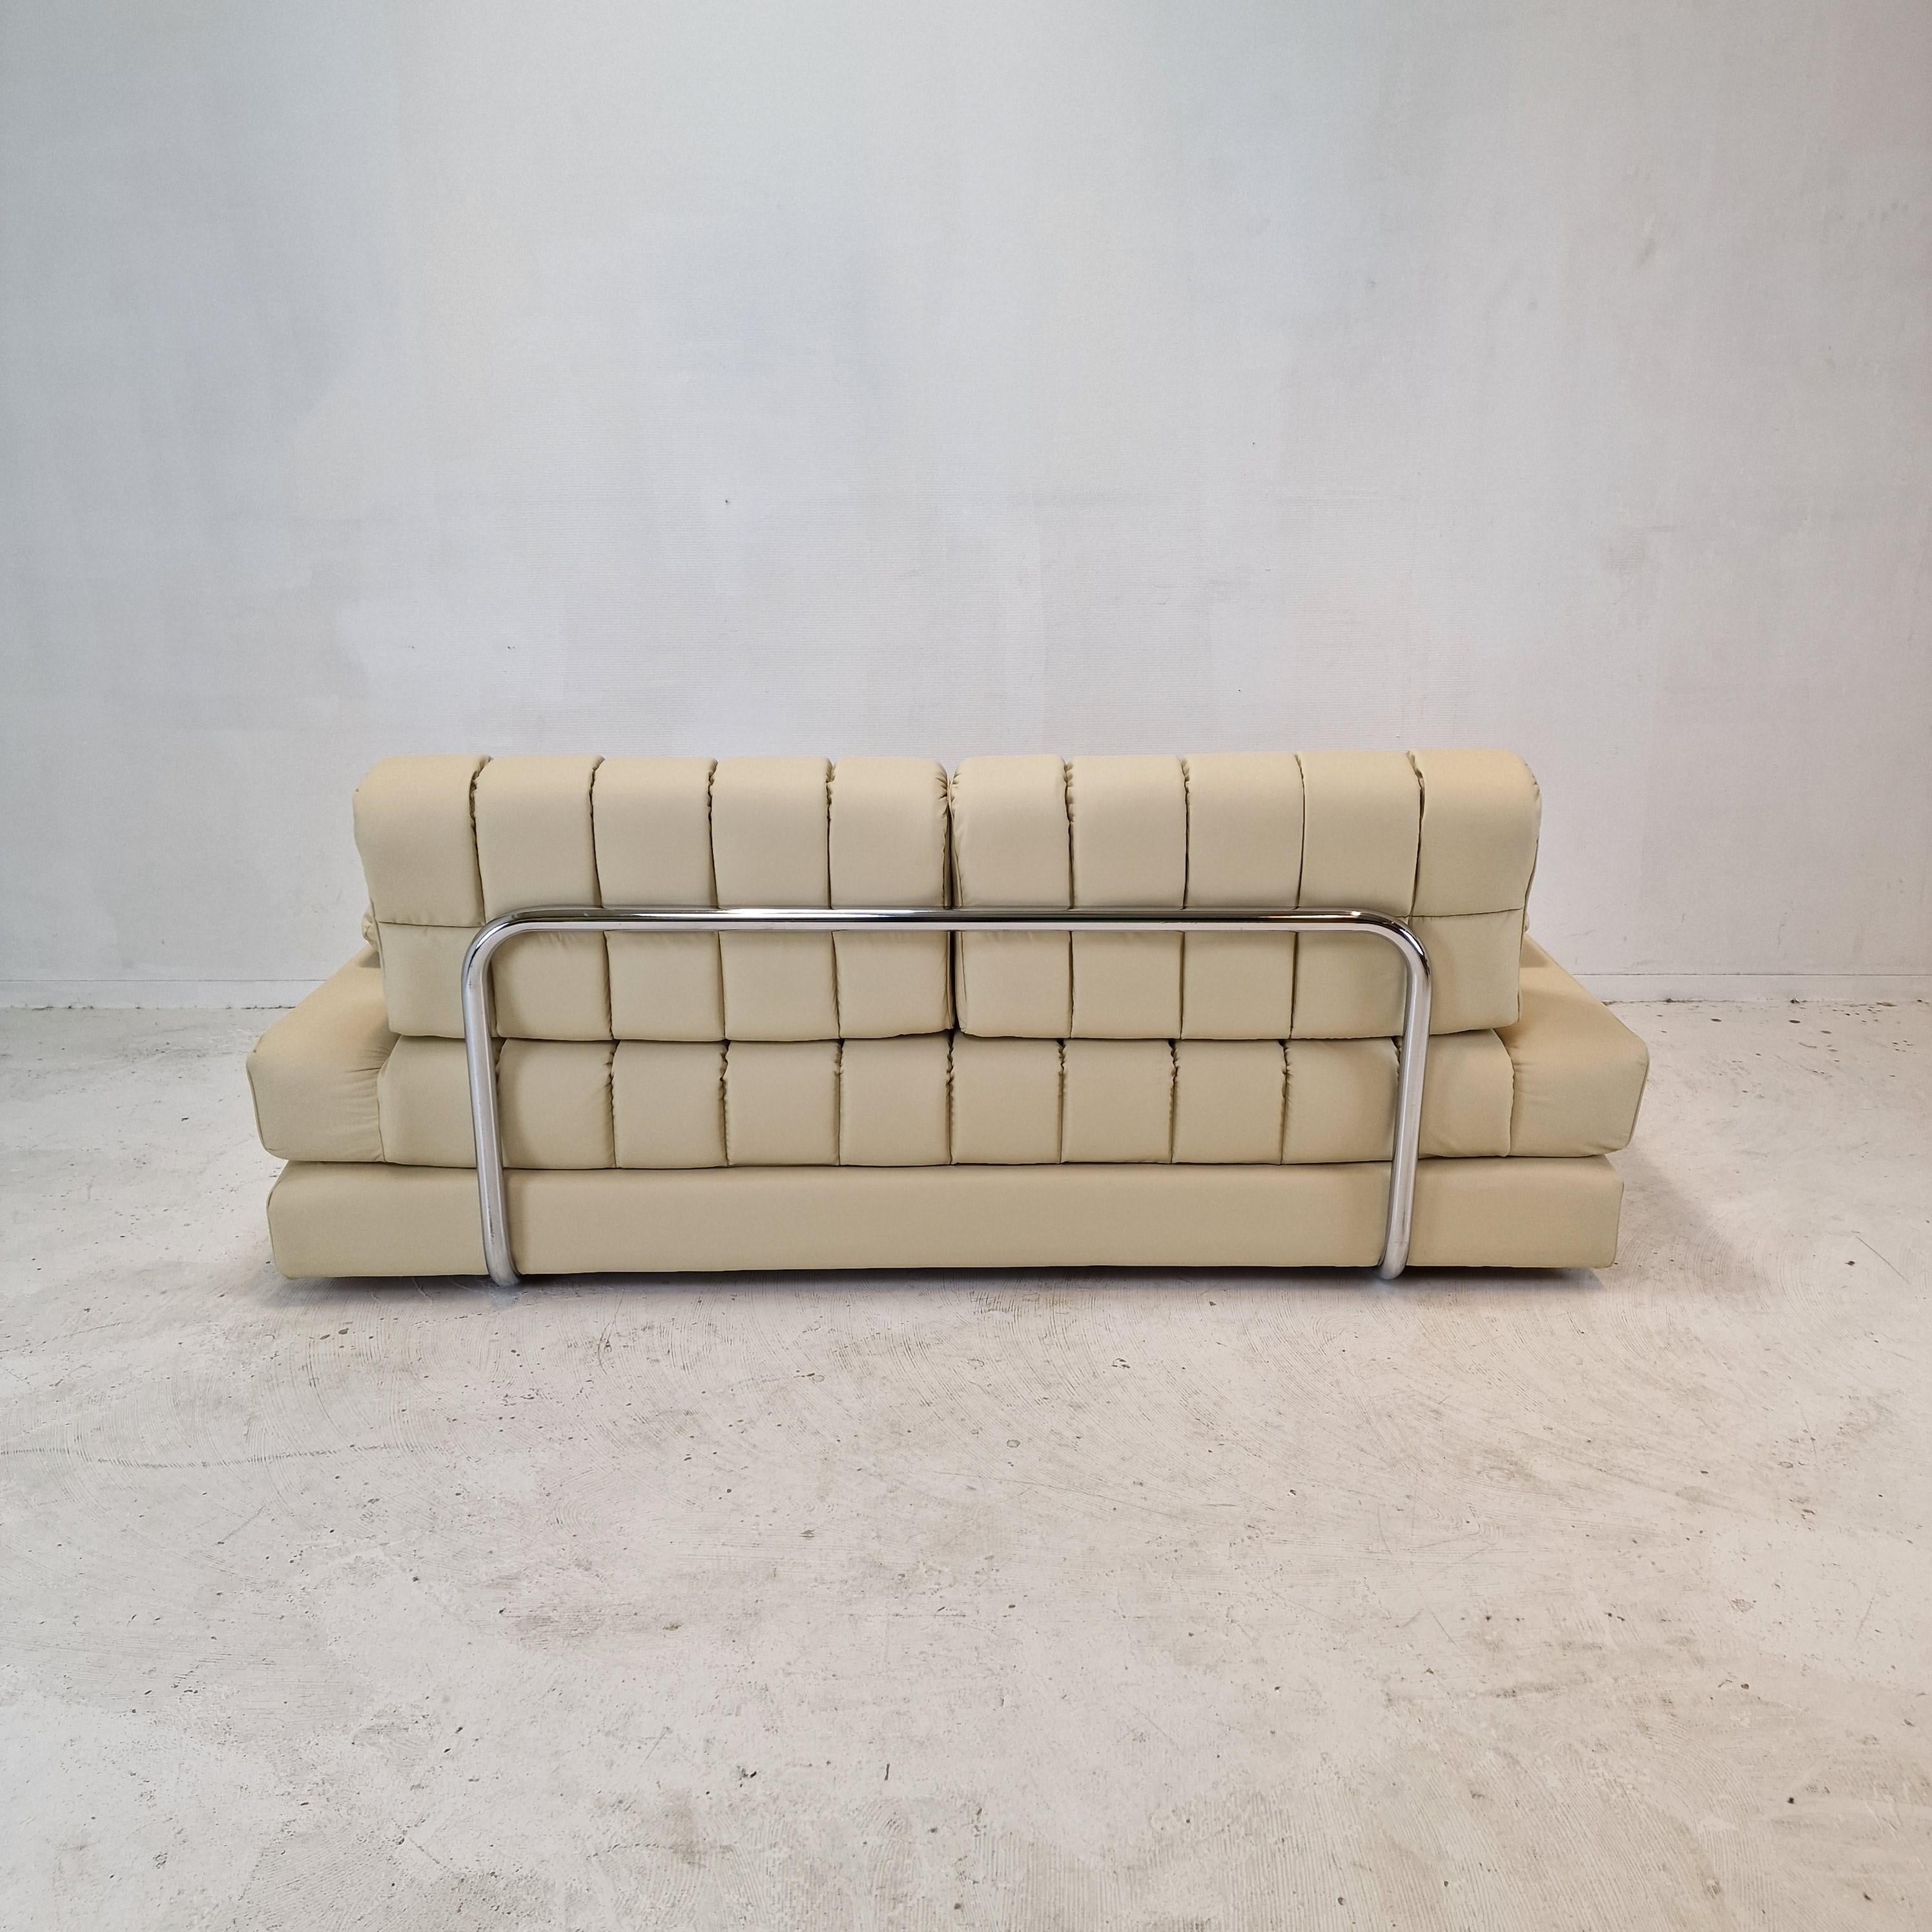 DS-85 Sofa or Daybed by De Sede, Switzerland 1970s For Sale 12